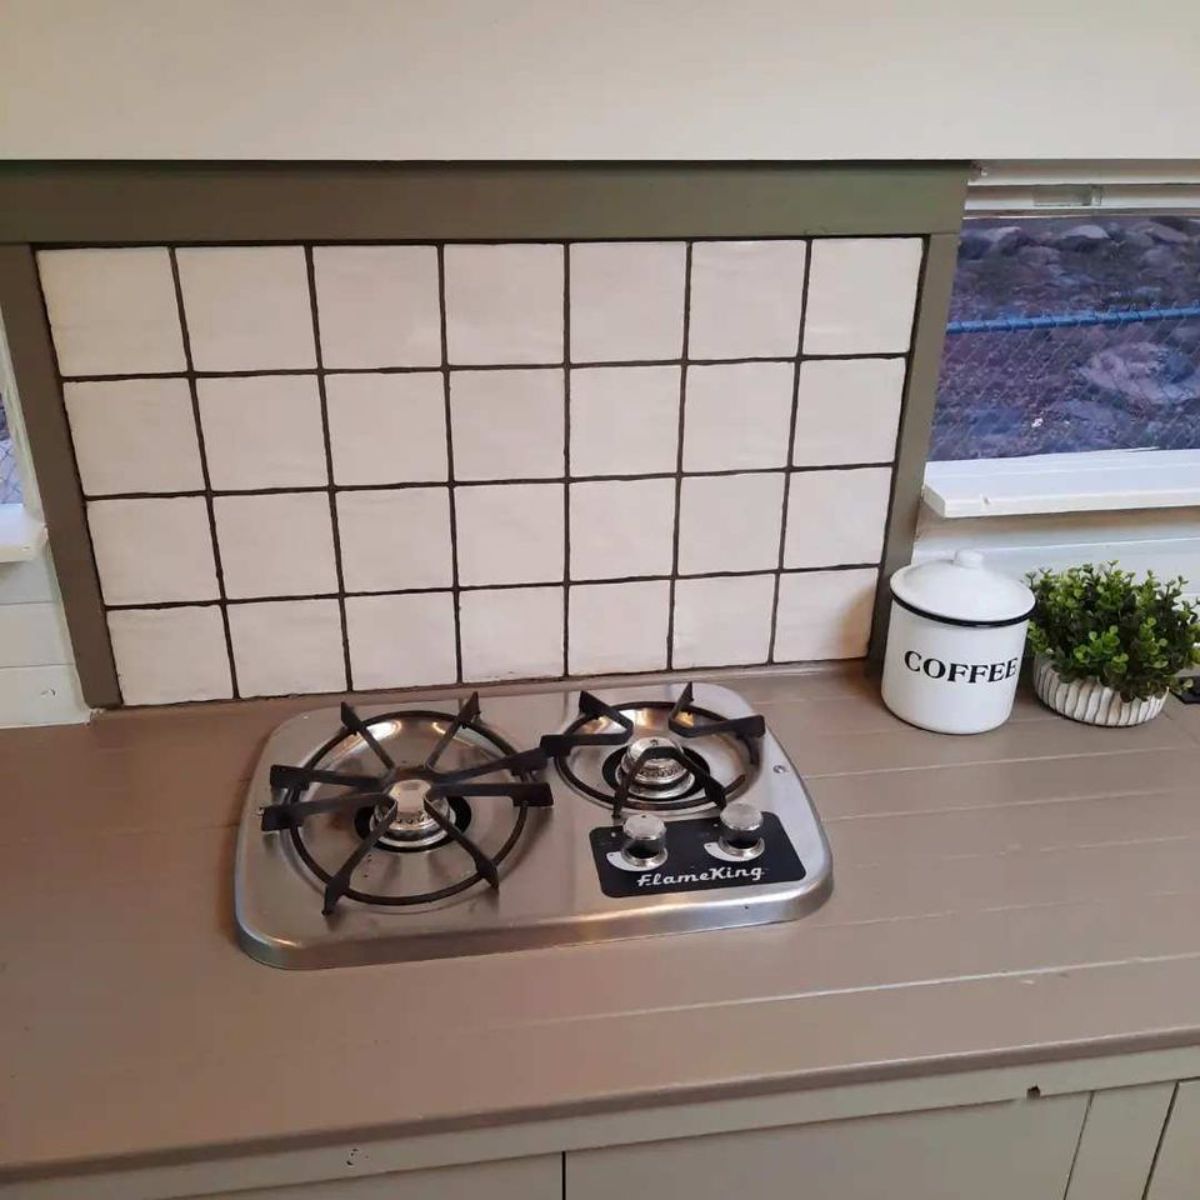 gas stove in the kitchen is included in the deal